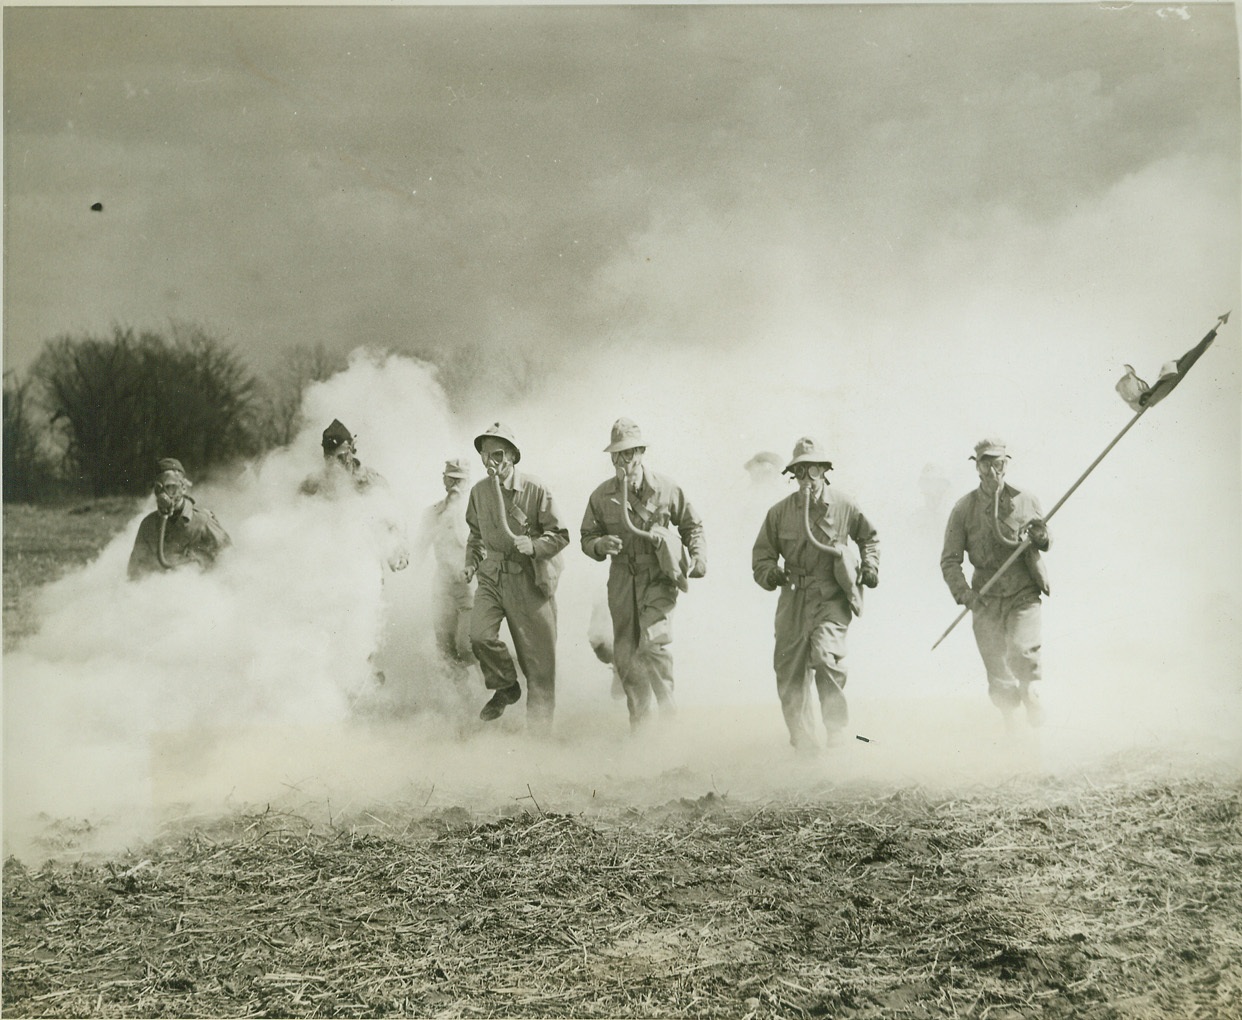 Army Camp “Guests” Learn Chemical Warfare, 3/23/1943. Camp Atterbury, Ind.—Some of the 250 members of the CIO-UAW who are guests at Camp Atterbury, Ind. Where they are spending three days learning how a soldier works and lives, don gas masks and are put through a chemical warfare drill. Credit: ACME.;